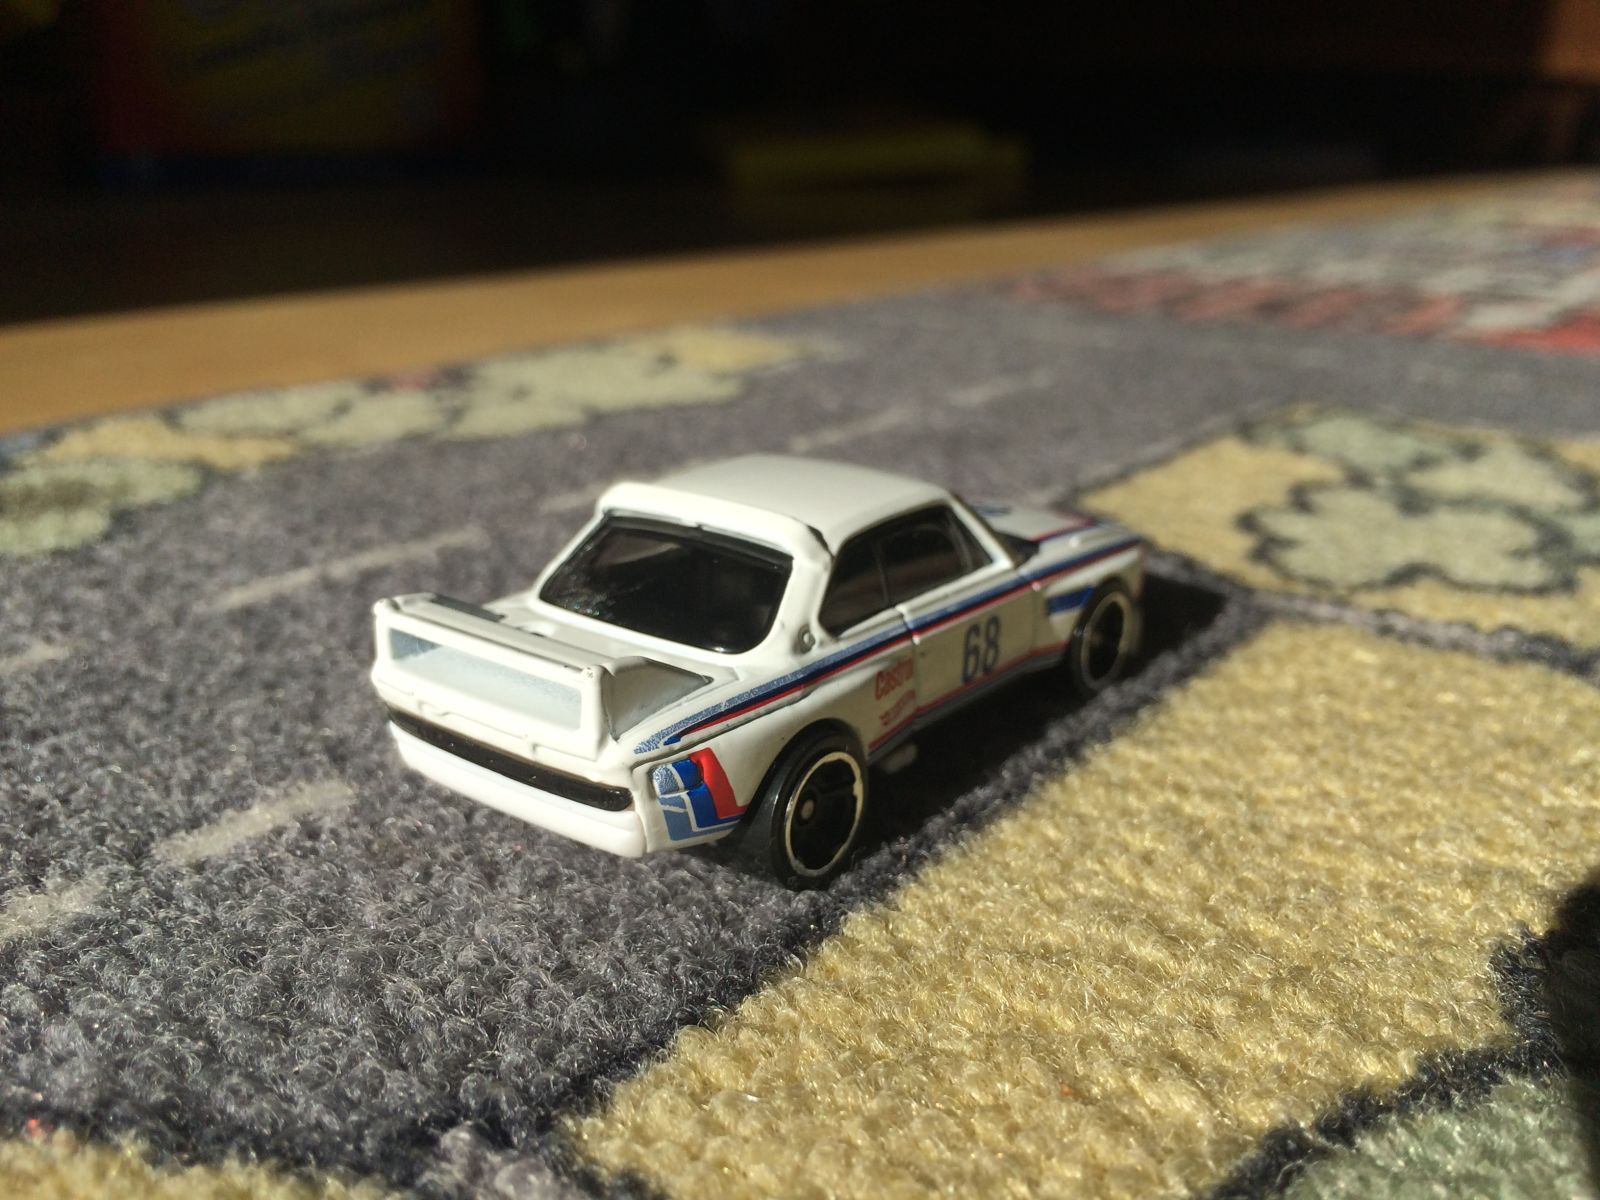 Hot Wheels did a great job replicating this racing icon, I especially love the shark-nose front fascia!